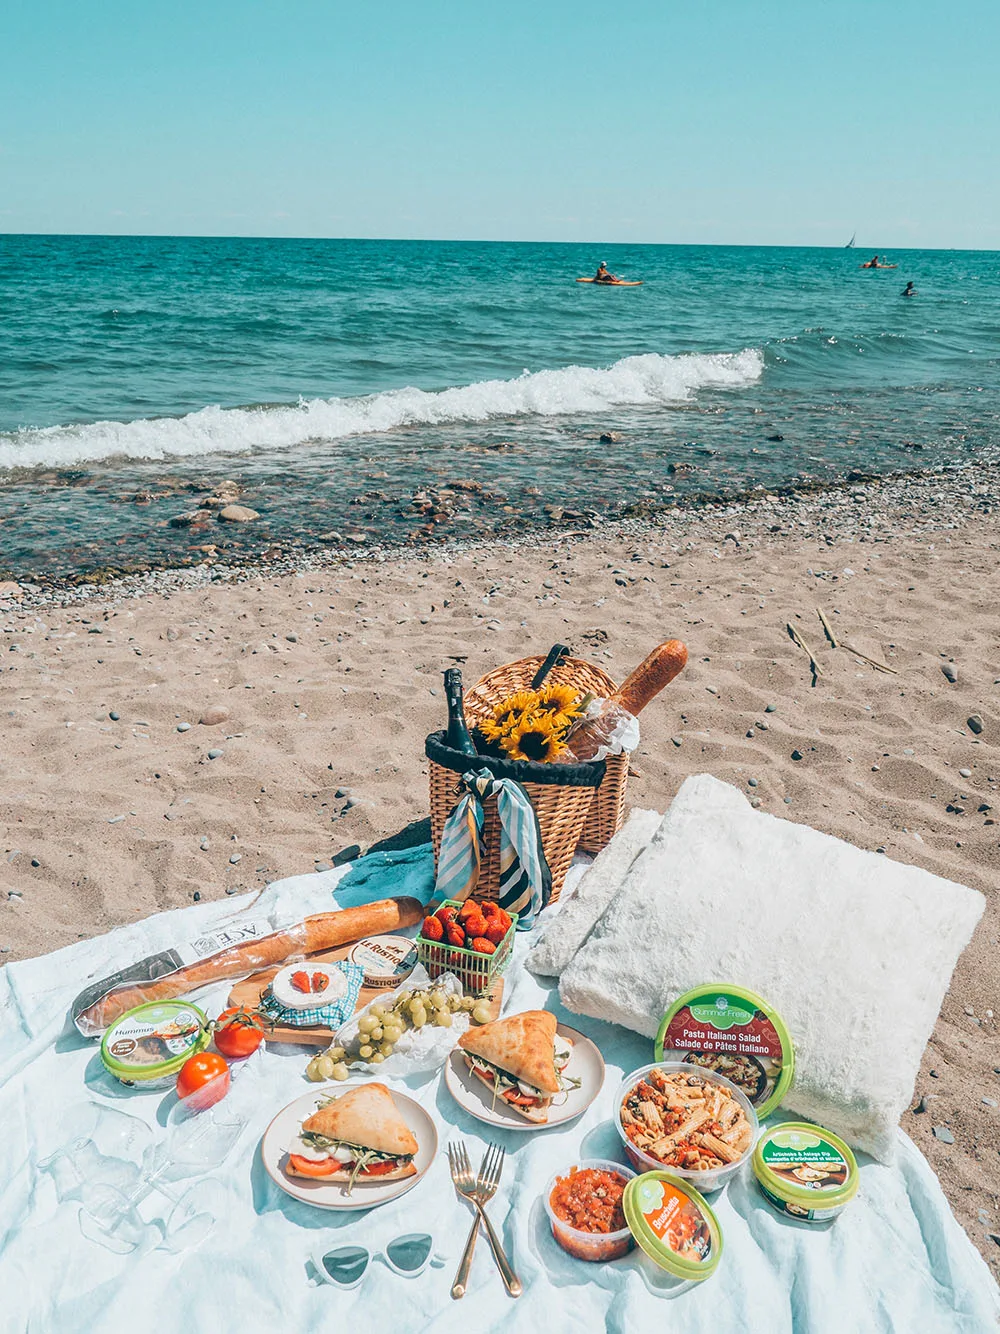 Looking for an incredible place to enjoy your next picnic in Toronto? This guide features some of the best picnic spots in Toronto from a local's perspective. Whether you're looking to picnic in a park, to spend your day sunning and snacking on a beach, prefer a garden hang, or want to check out a more unique destination, this guide has all of the best picnic spots for you to choose from. Pictured here: Woodbine Beach